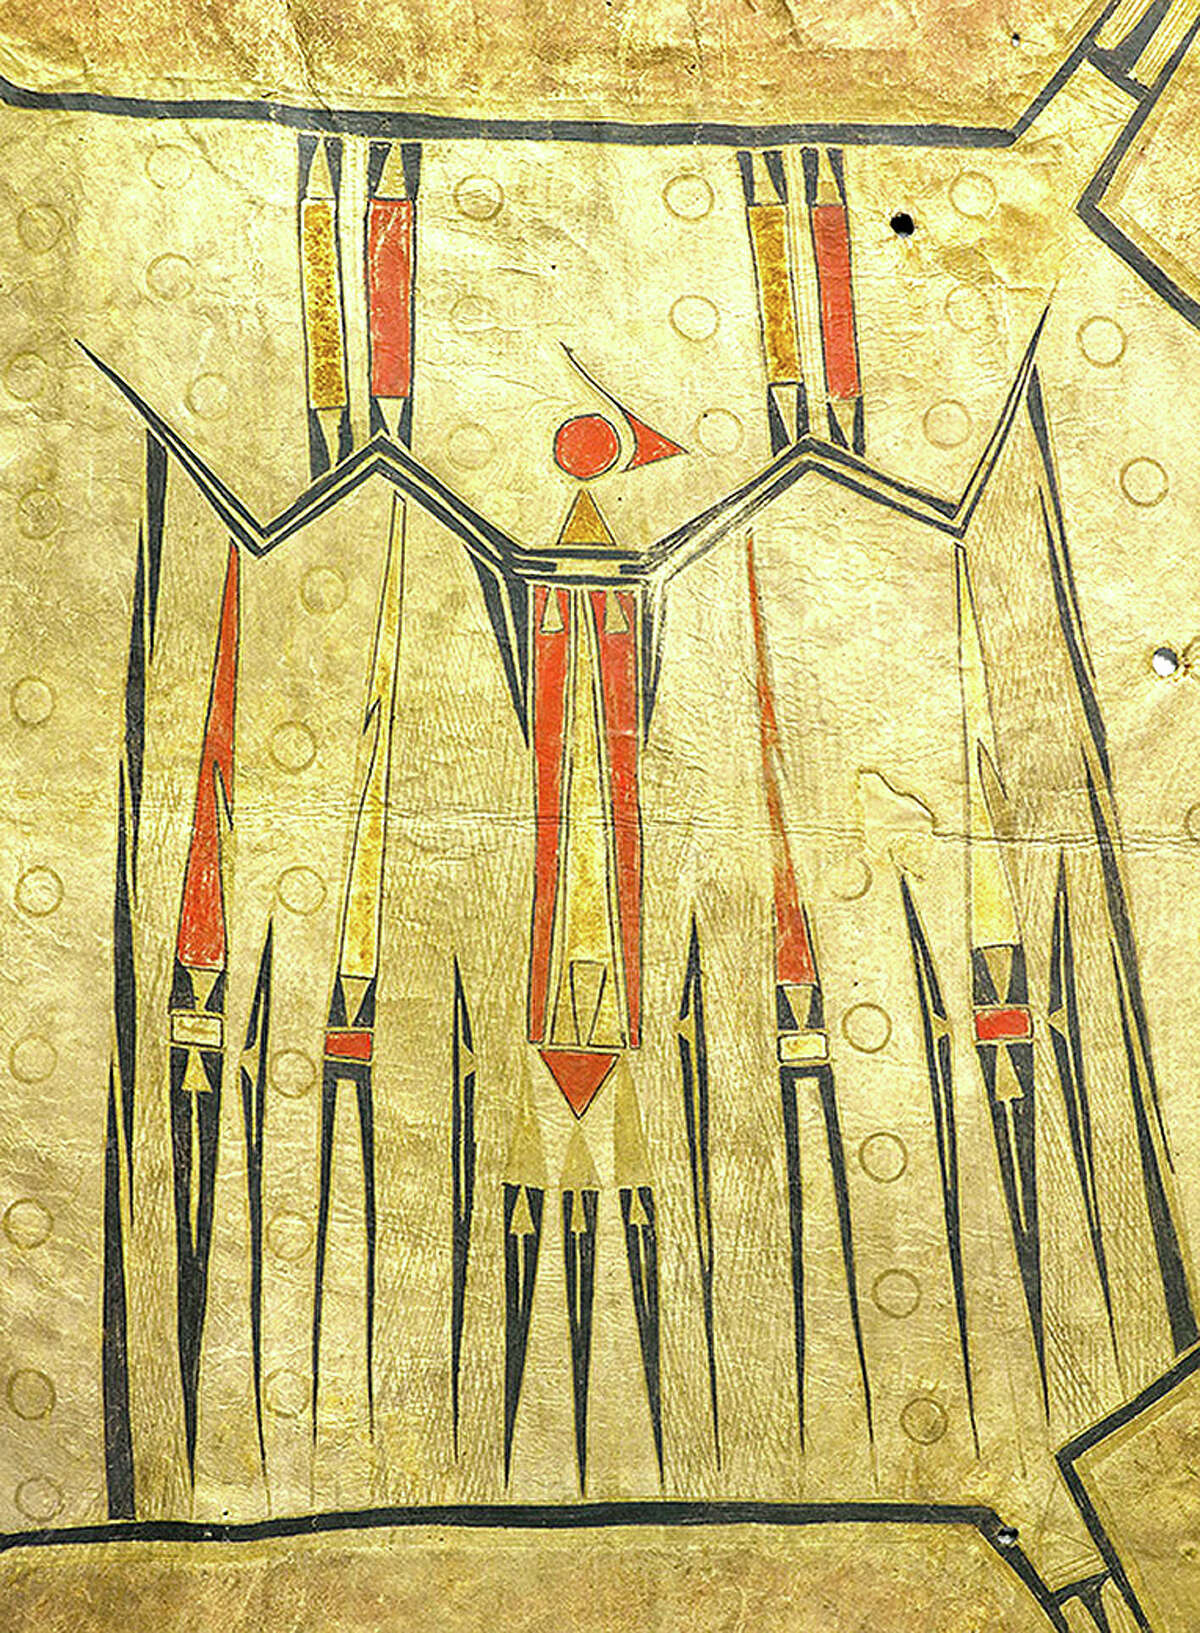 One of the best examples of the tribes’ hide-painting tradition is an 18th-century ceremonial robe featuring an iconic image of a thunderbird, now in the collection of the Musée du Quai Branly-Jacques Chirac in Paris.